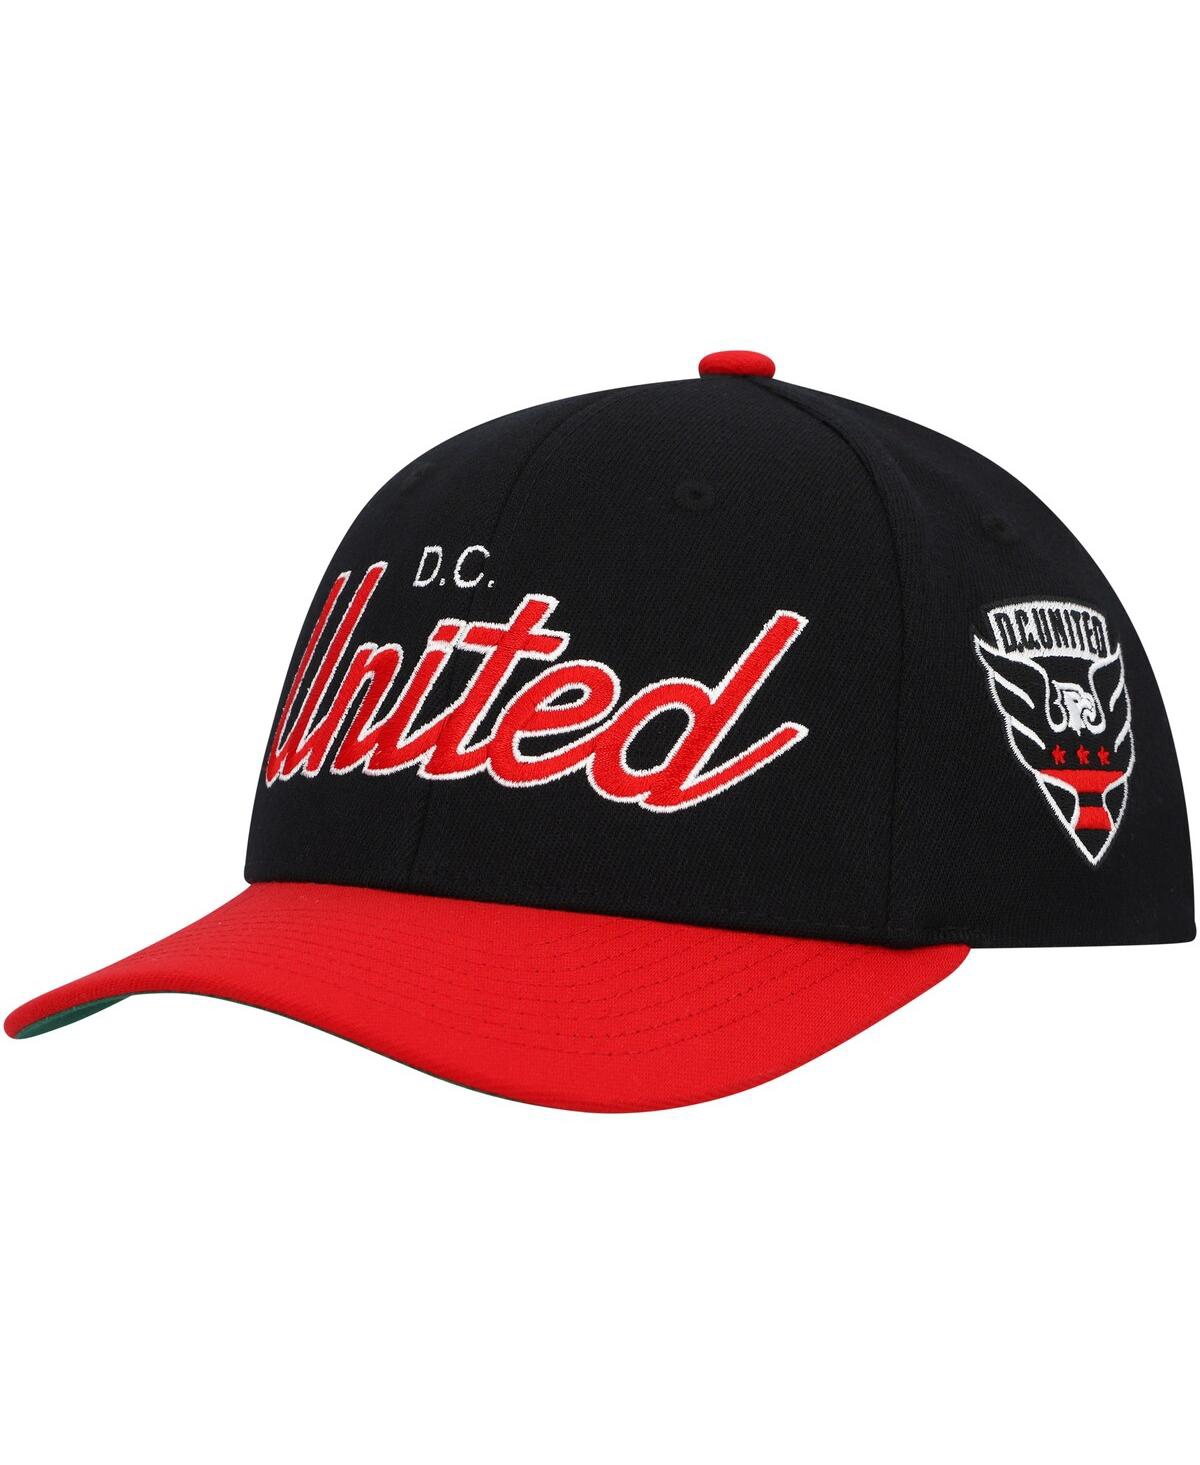 Men's Mitchell & Ness White Chicago Bulls Hardwood Classics 1993 NBA Champions Back to Back to Back Fitted Hat, Size: 7 1/4, Bul White